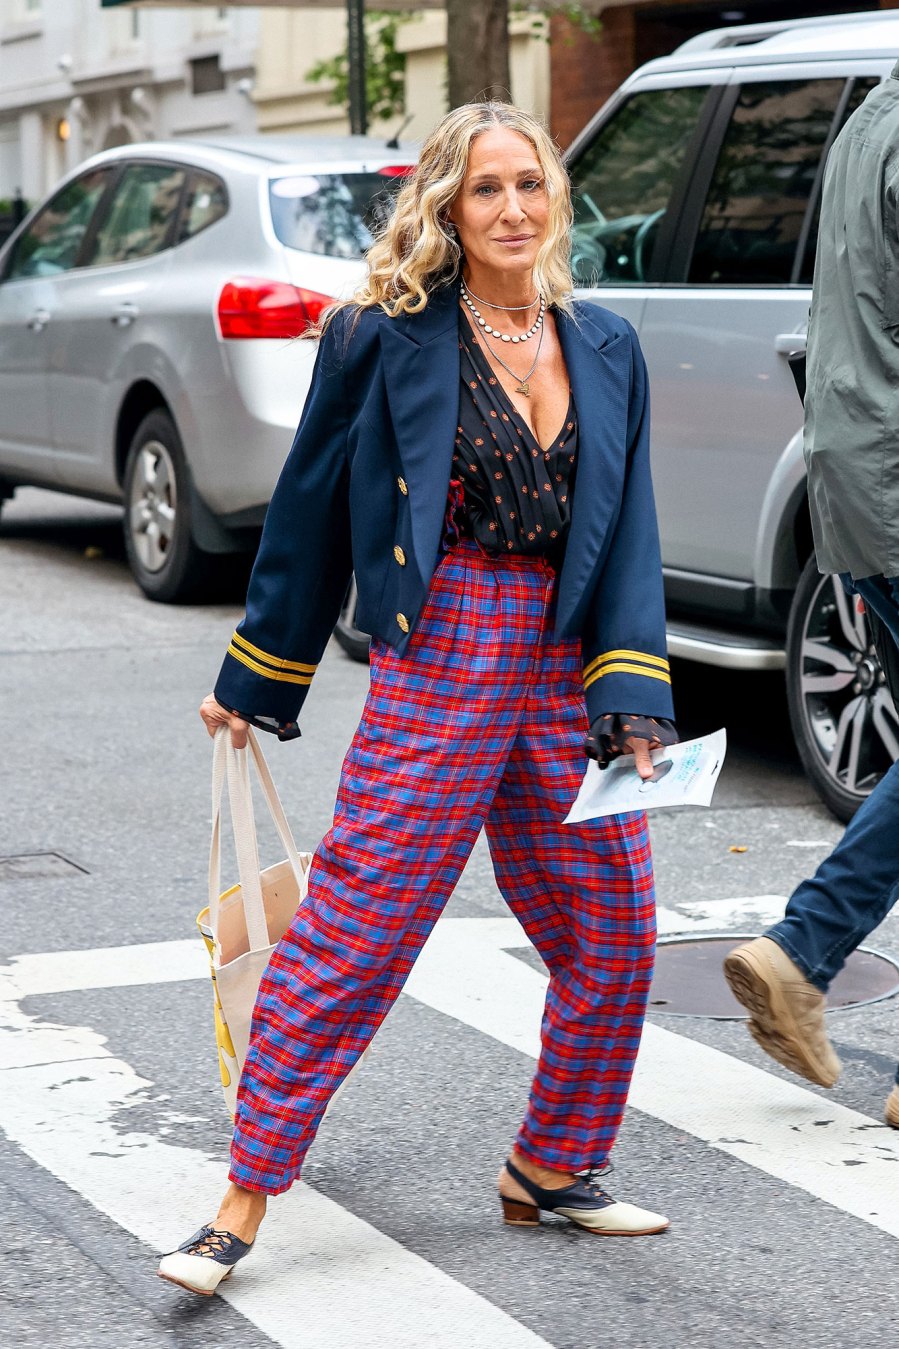 https://www.usmagazine.com/wp-content/uploads/2021/08/Playing-With-Prints-See-SJP-Eclectic-Ensemble-SATC-Reboot-0001.jpg?w=900&quality=86&strip=all